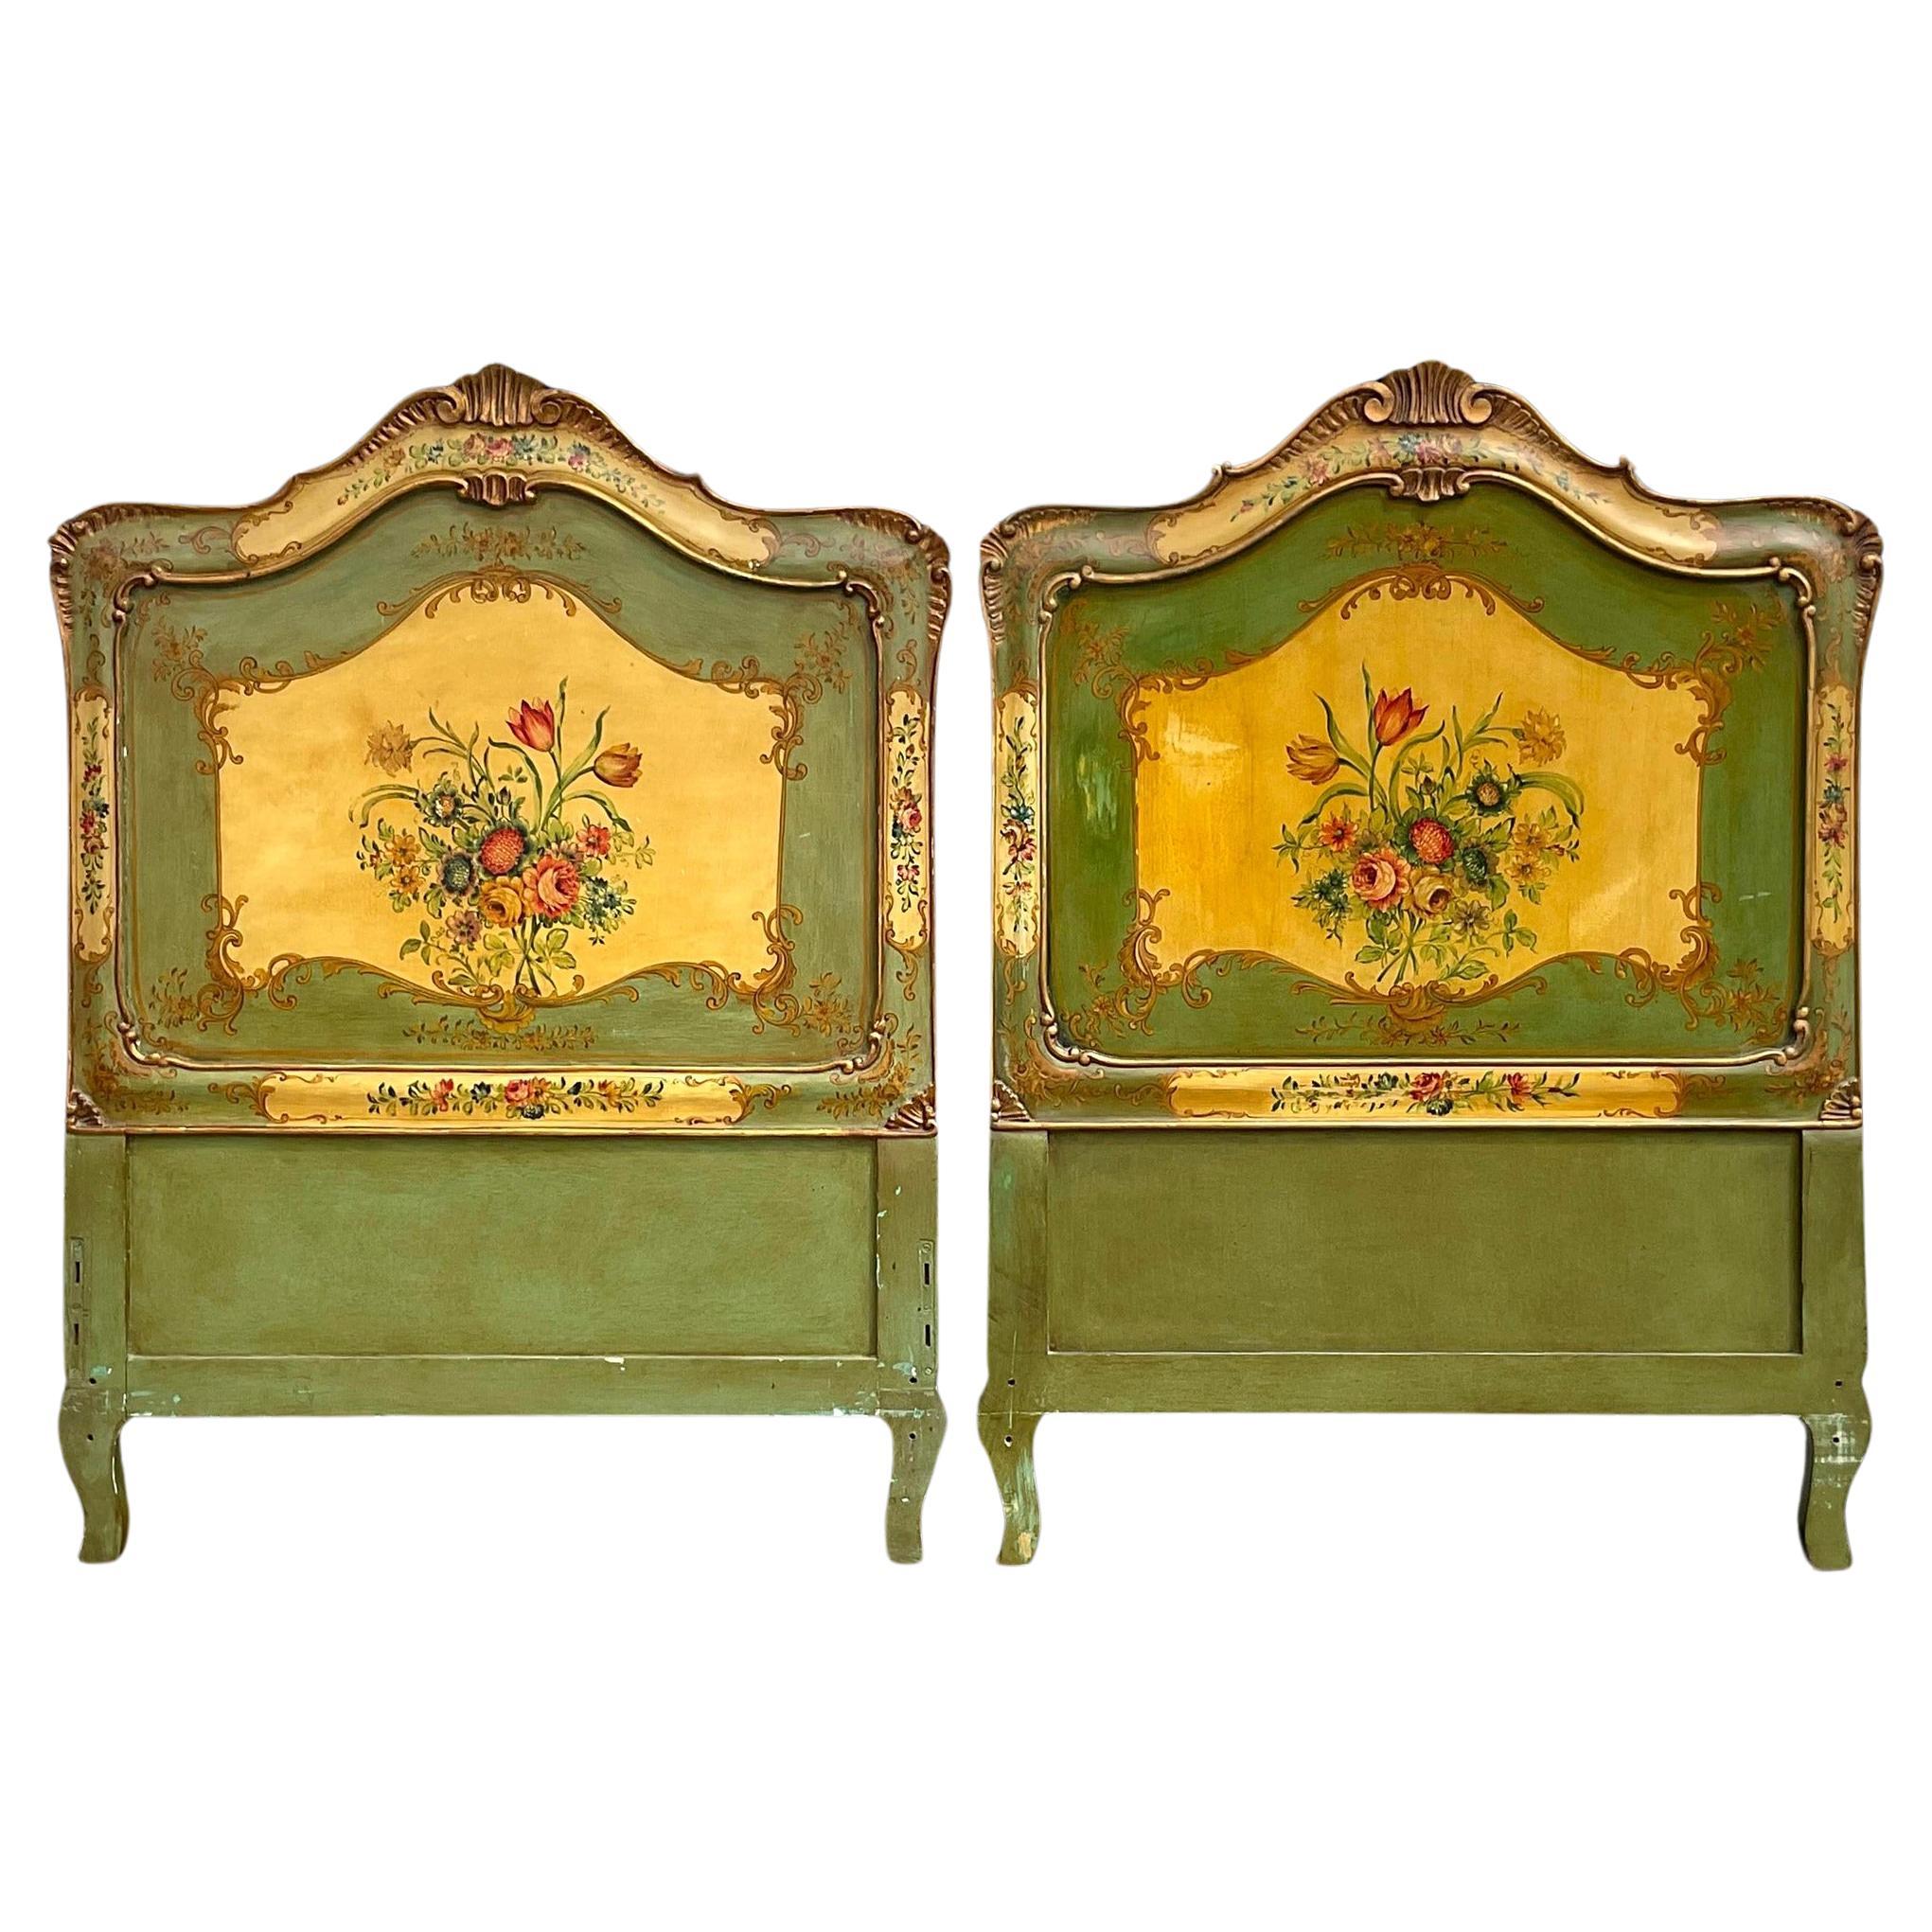 Vintage Italian Hand Painted Floral Twin Headboards - a Pair